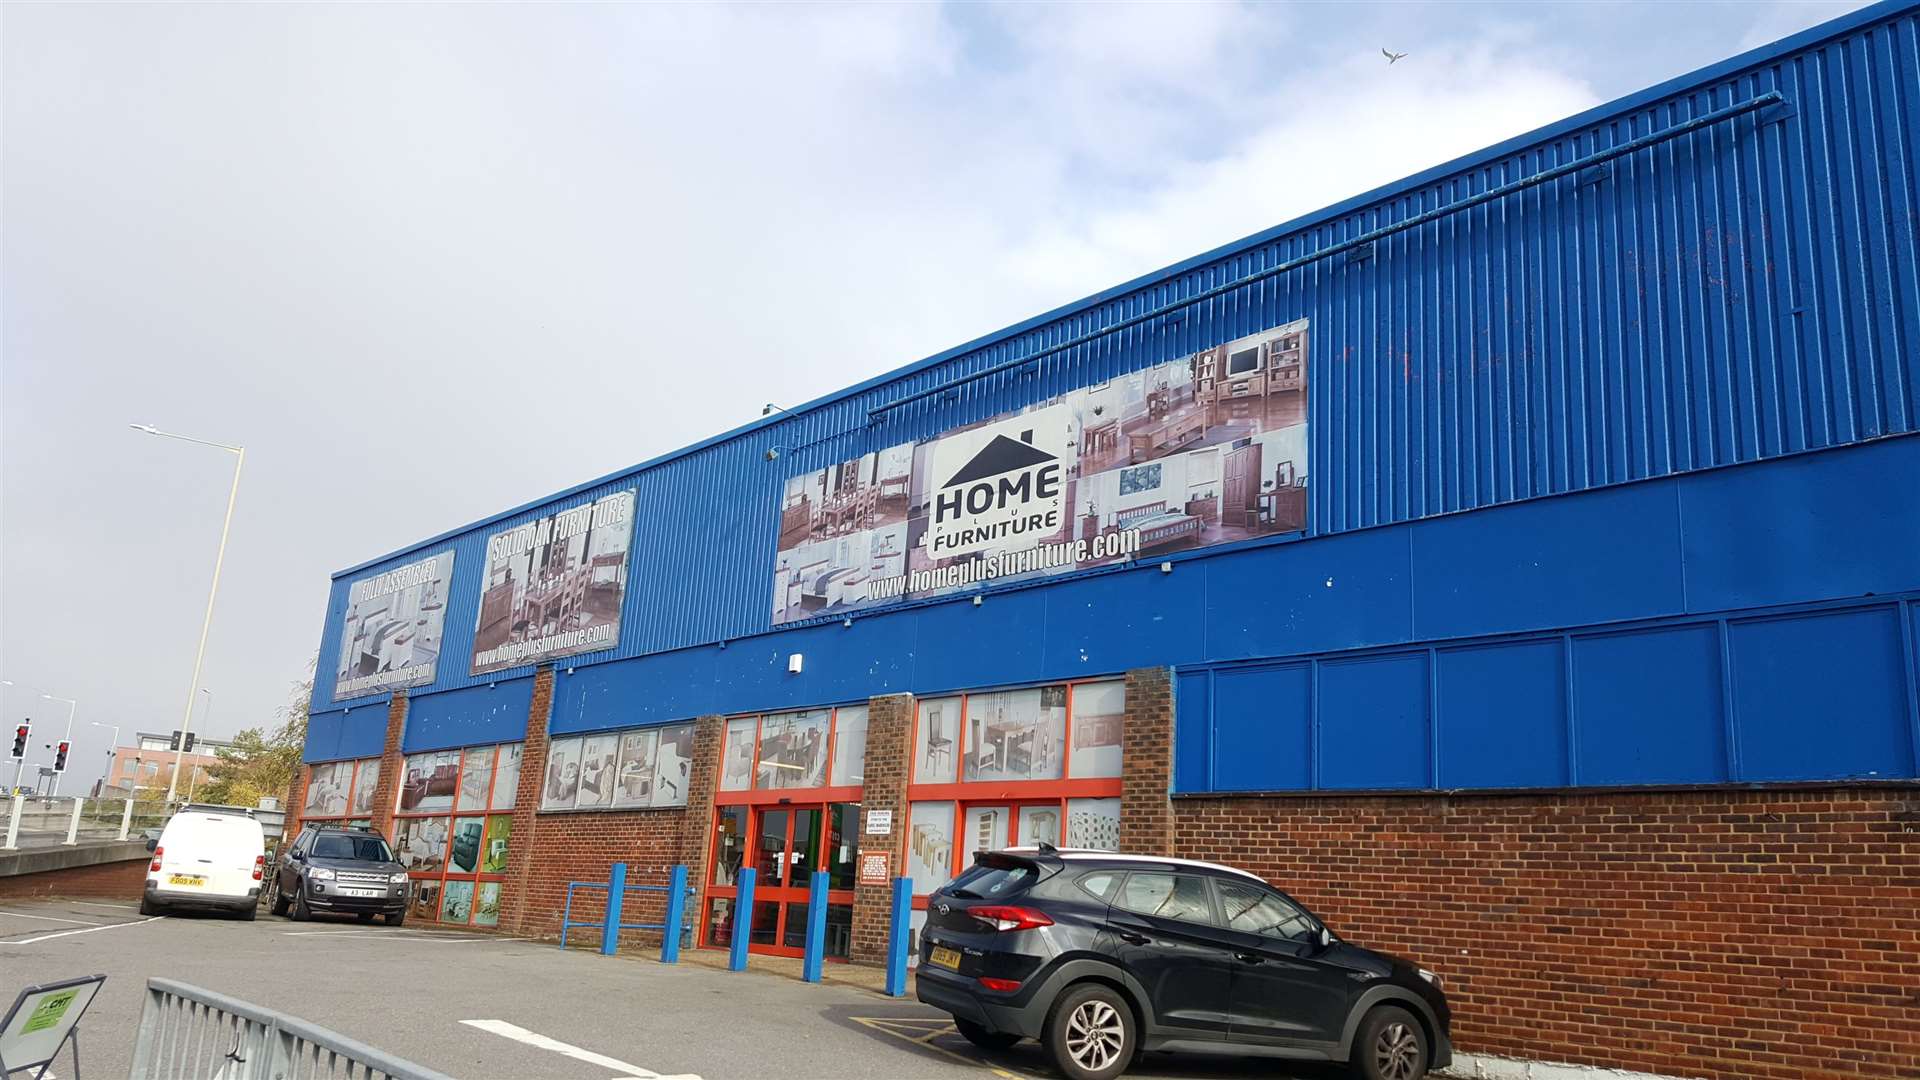 The HomePlus store before it was cordoned off ahead of its demolition